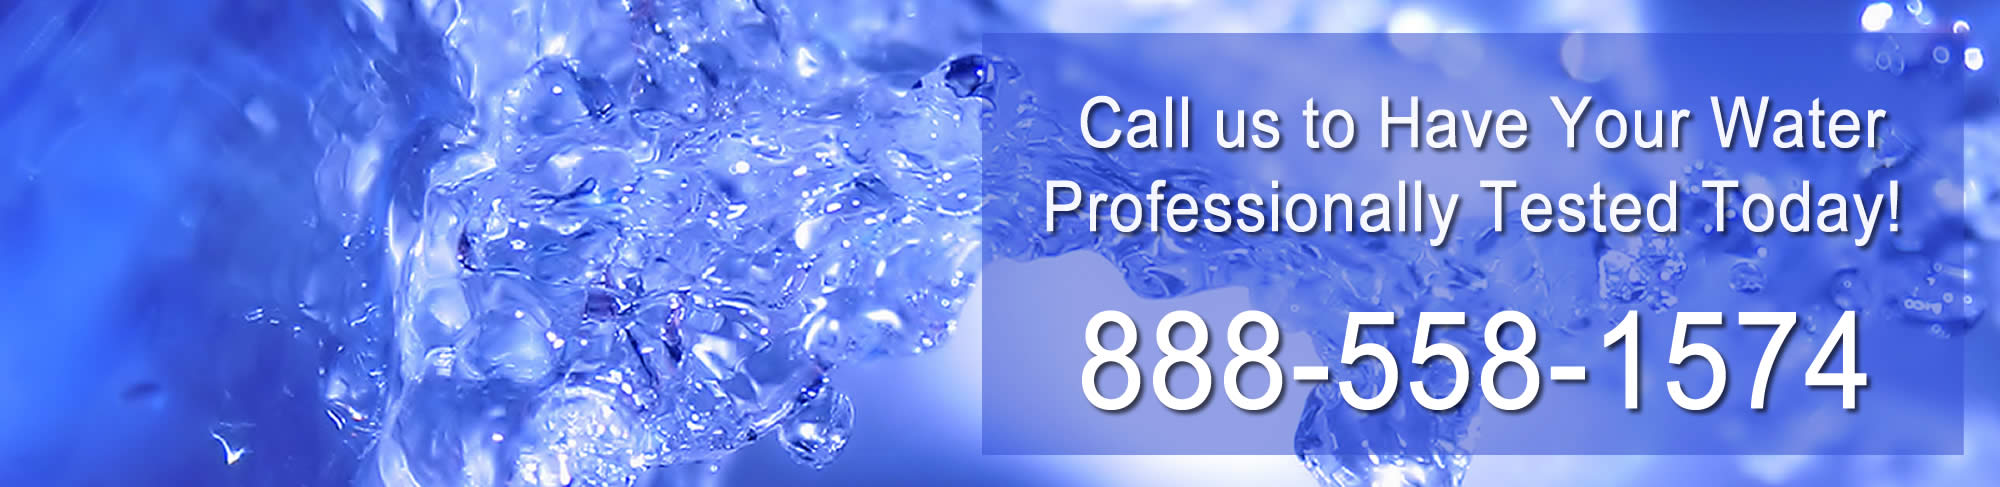 Specializing in Uncasville CT Water Testing and Analysis